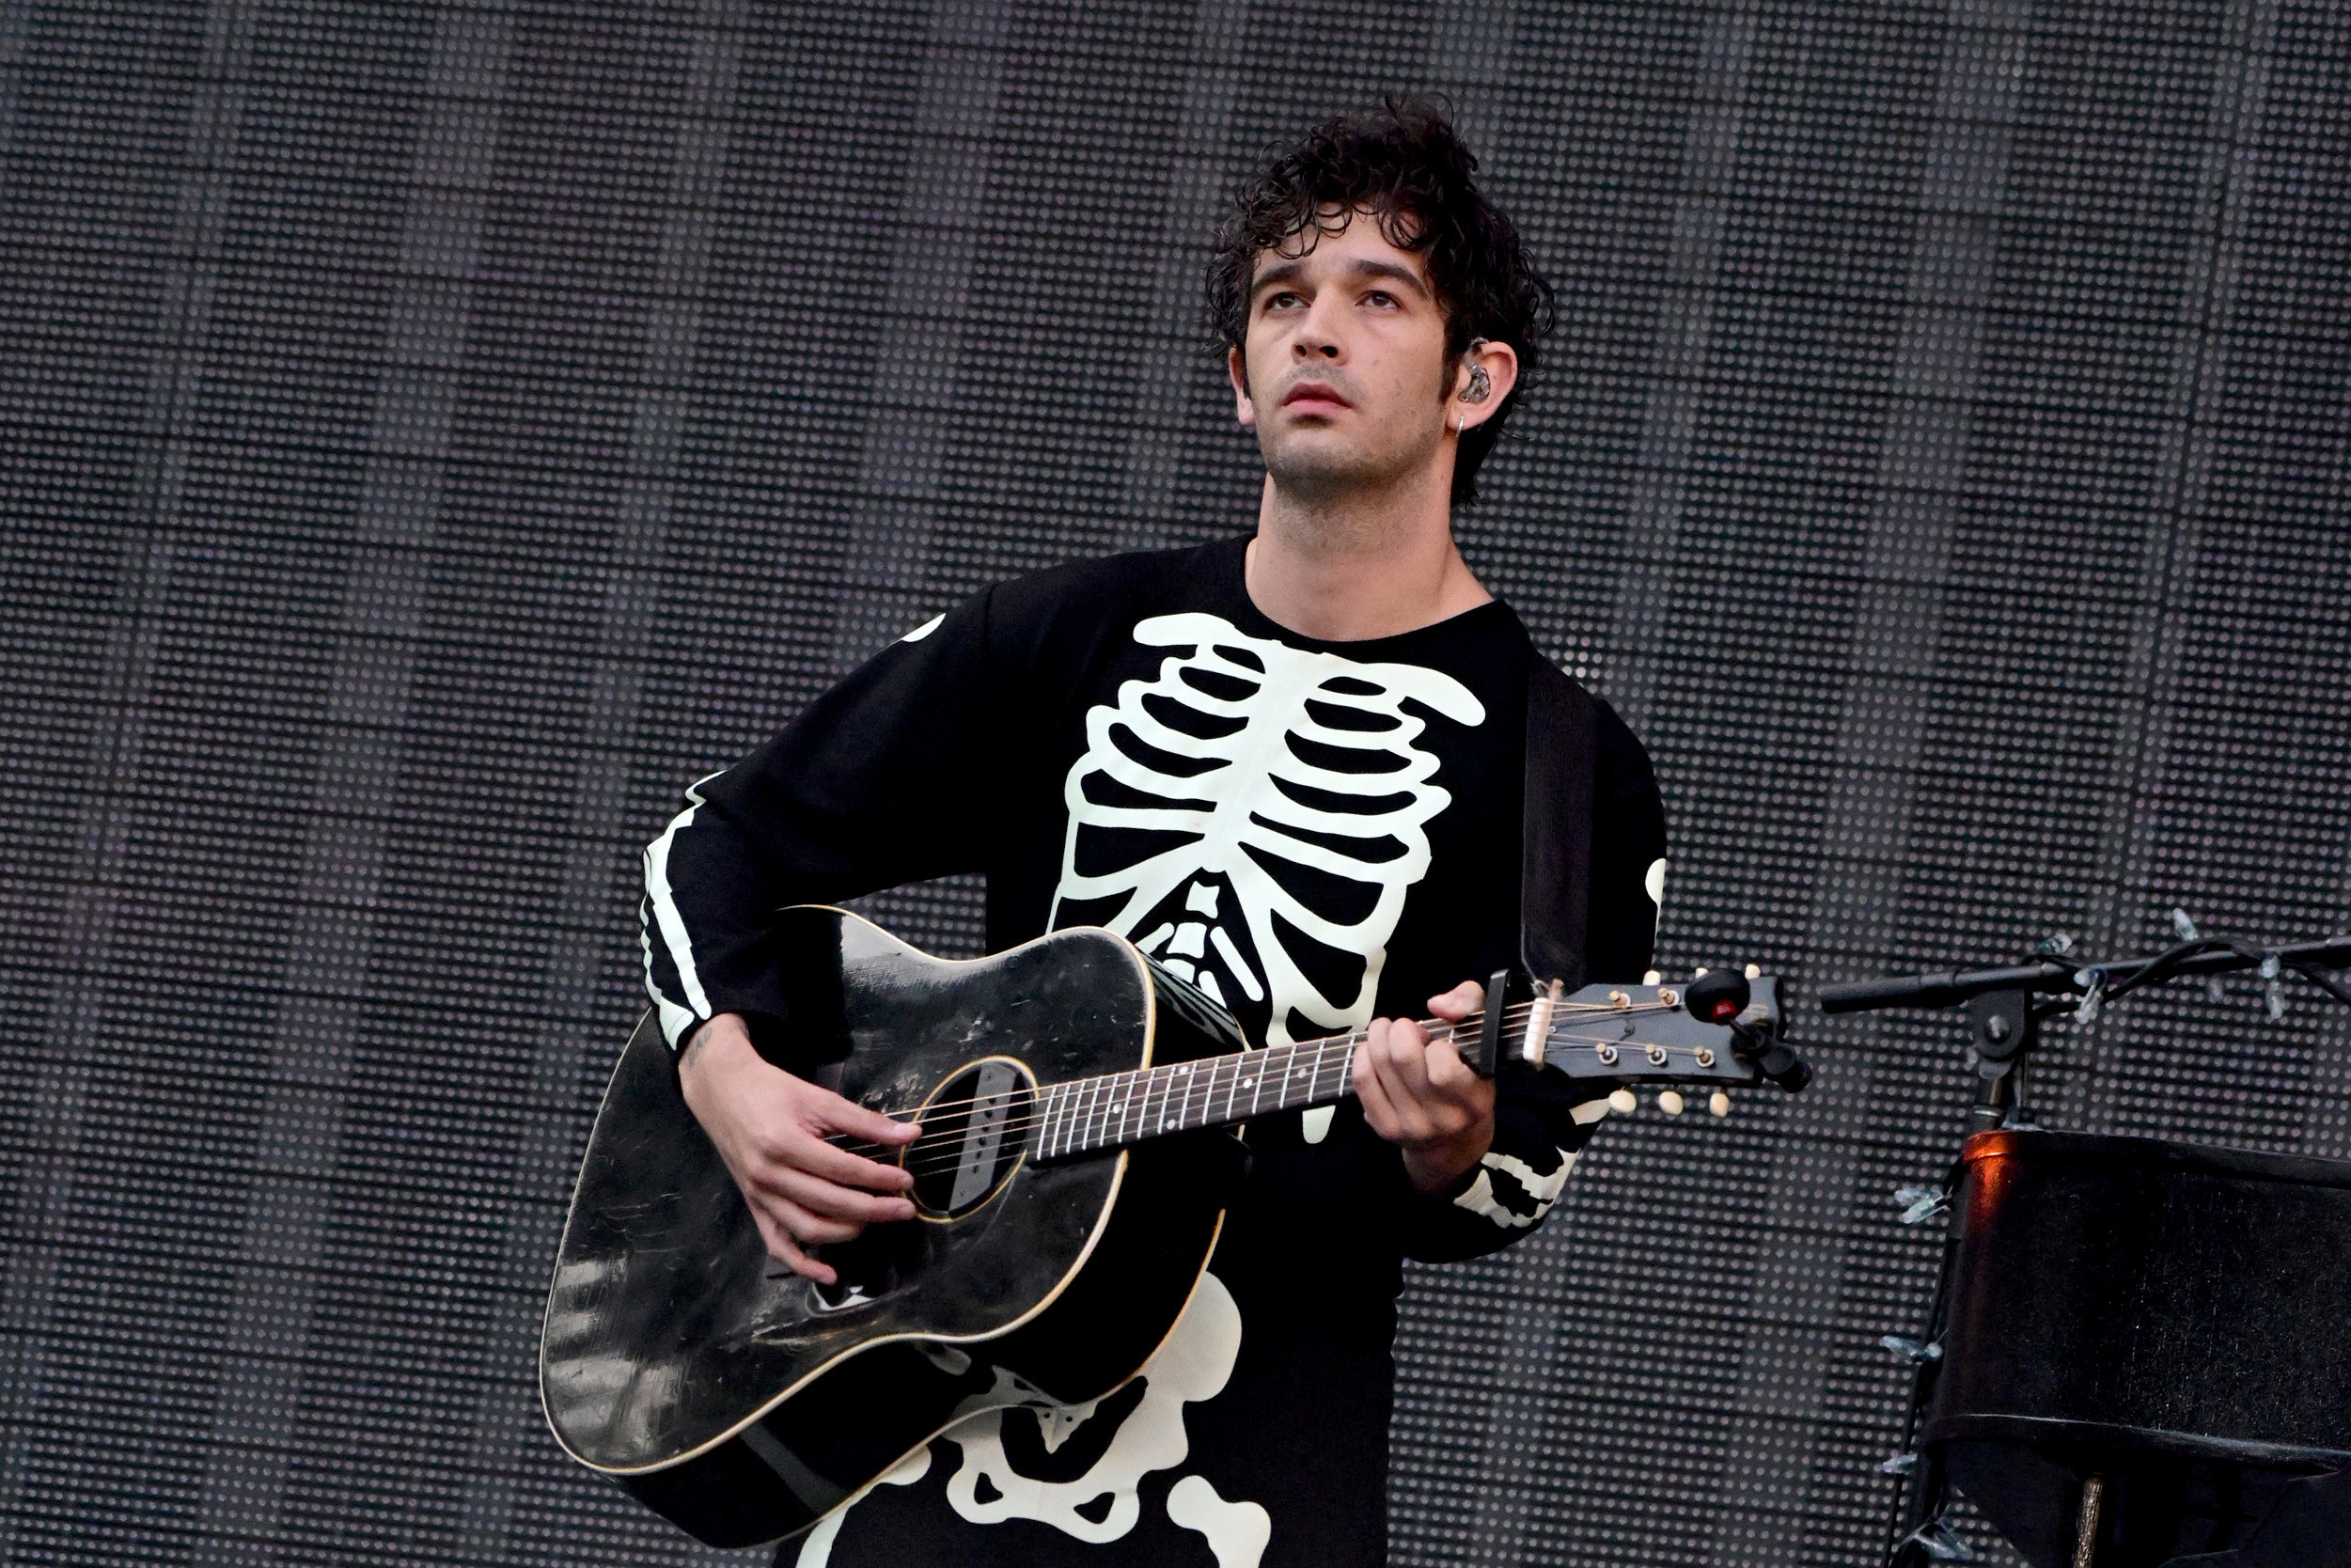 Close-up of Matty performing onstage and wearing a skeleton-motif outfit